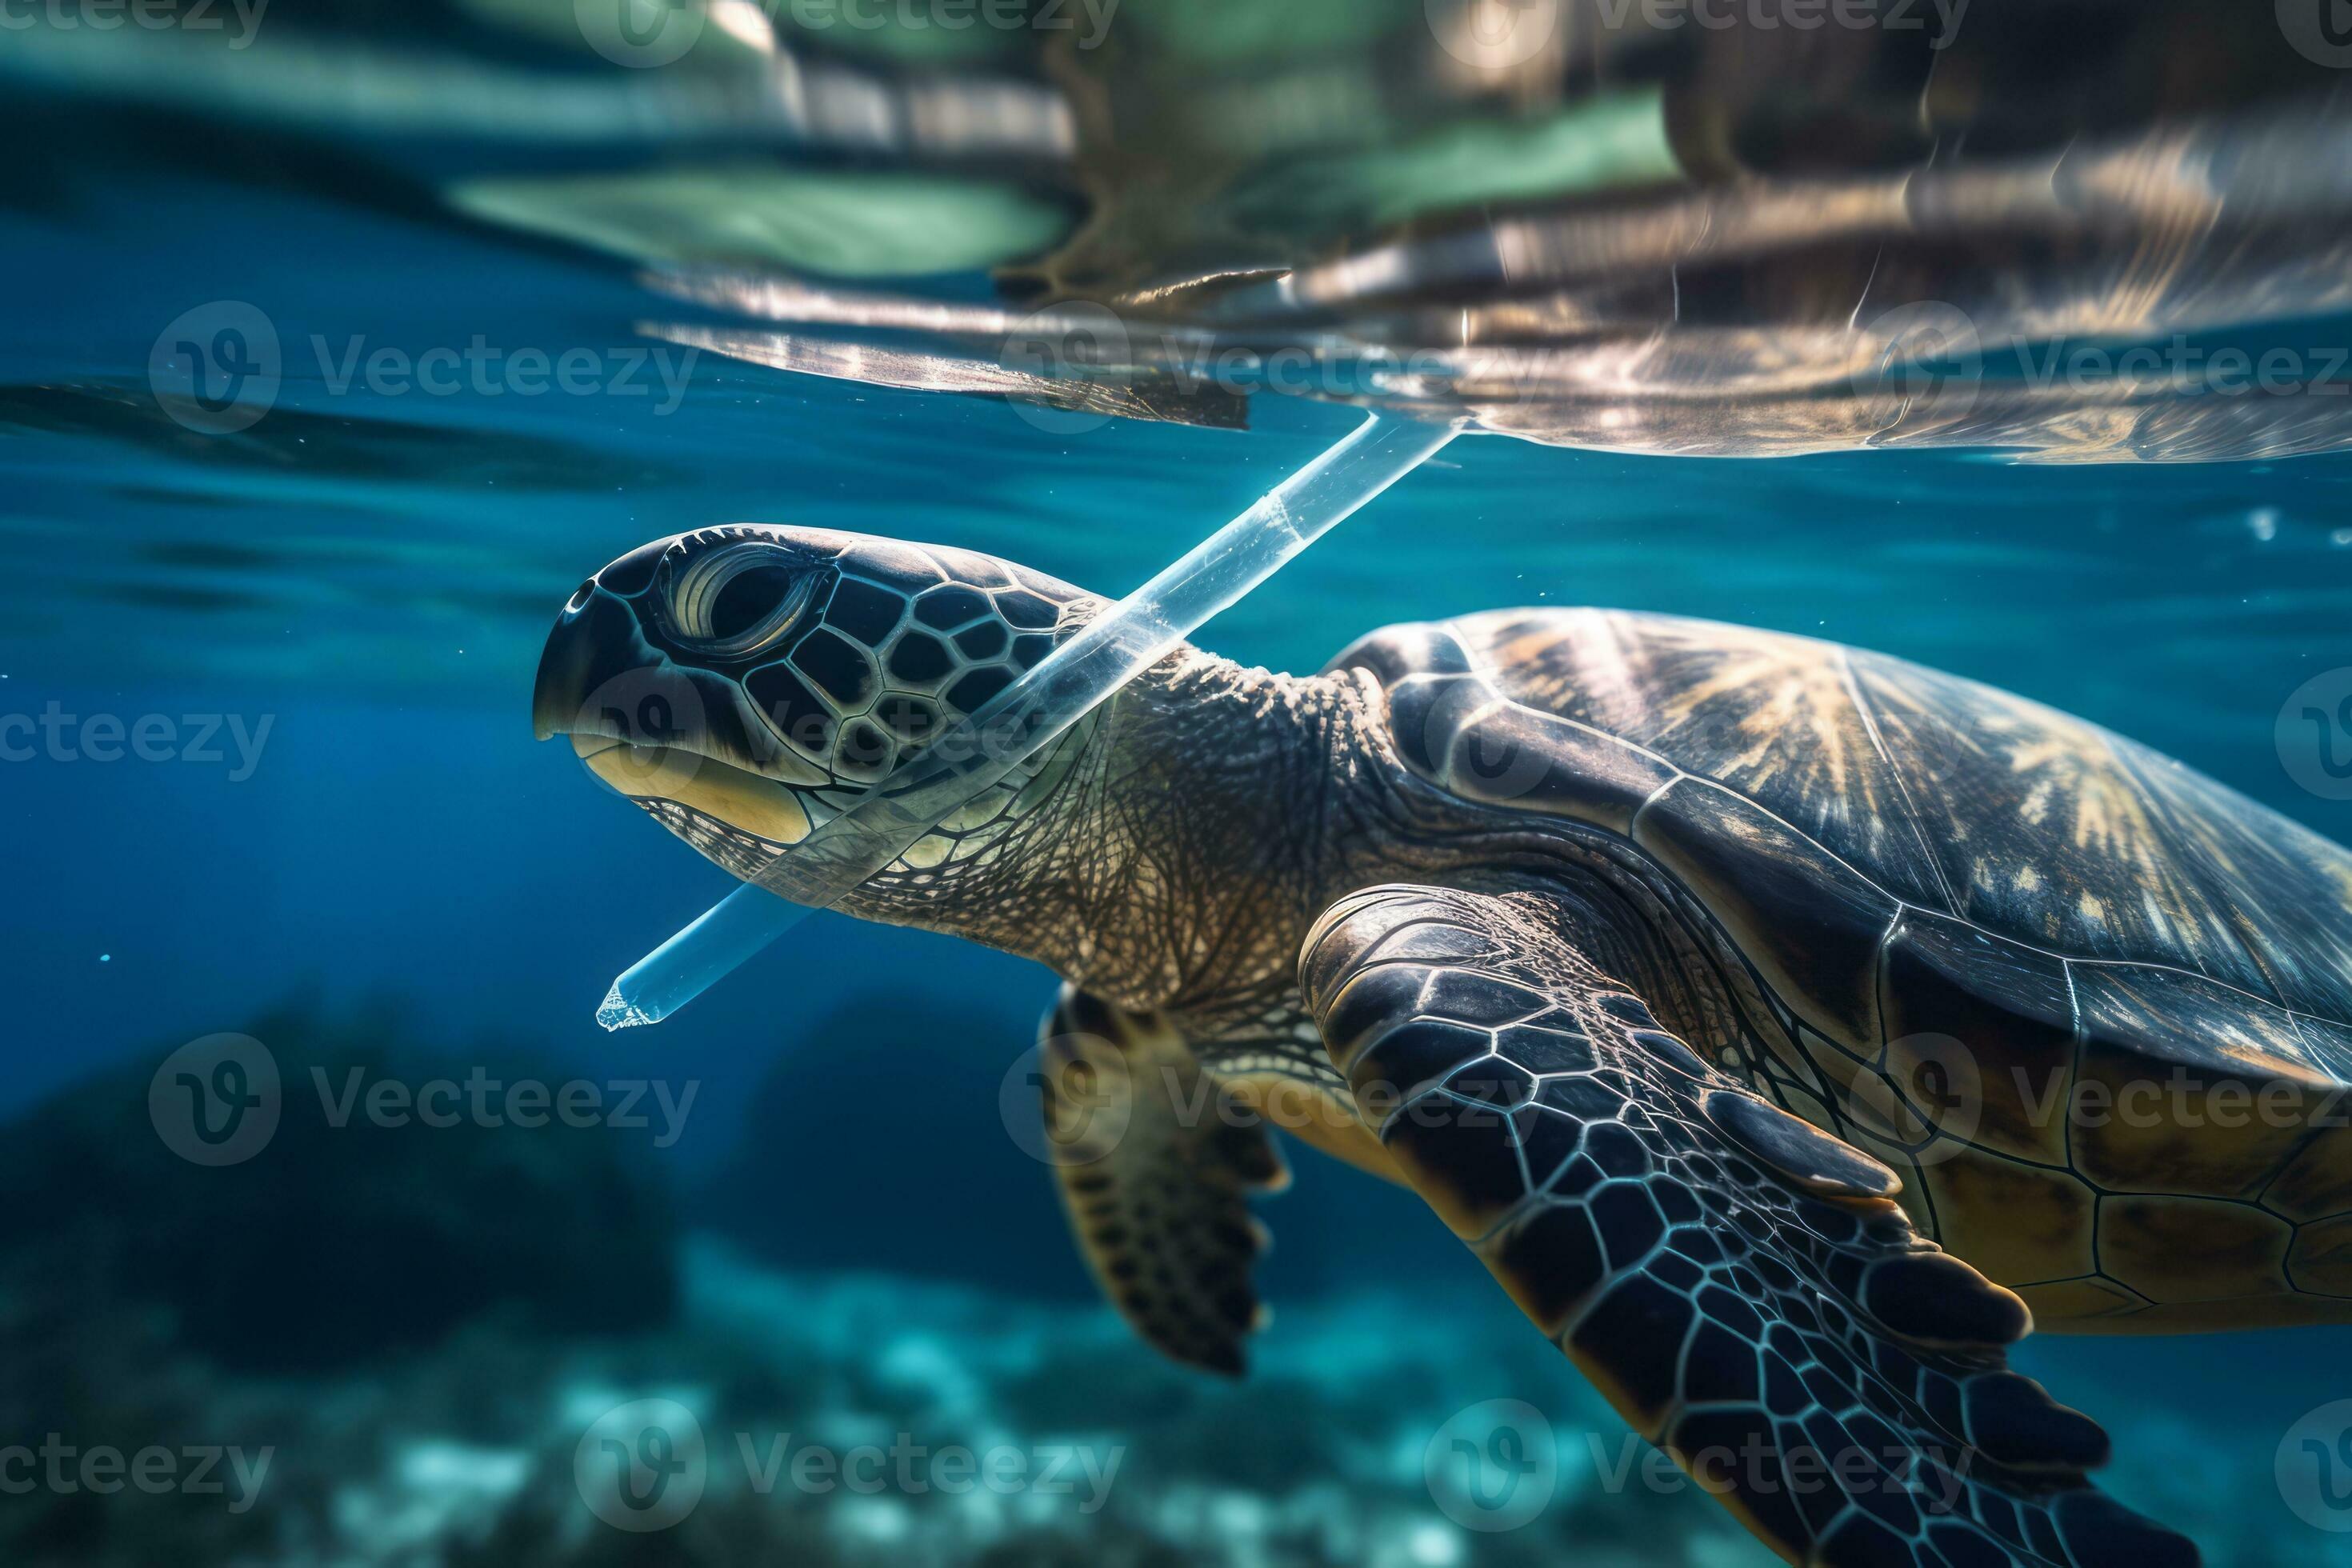 A powerful underwater shot of a plastic straw lodged in the